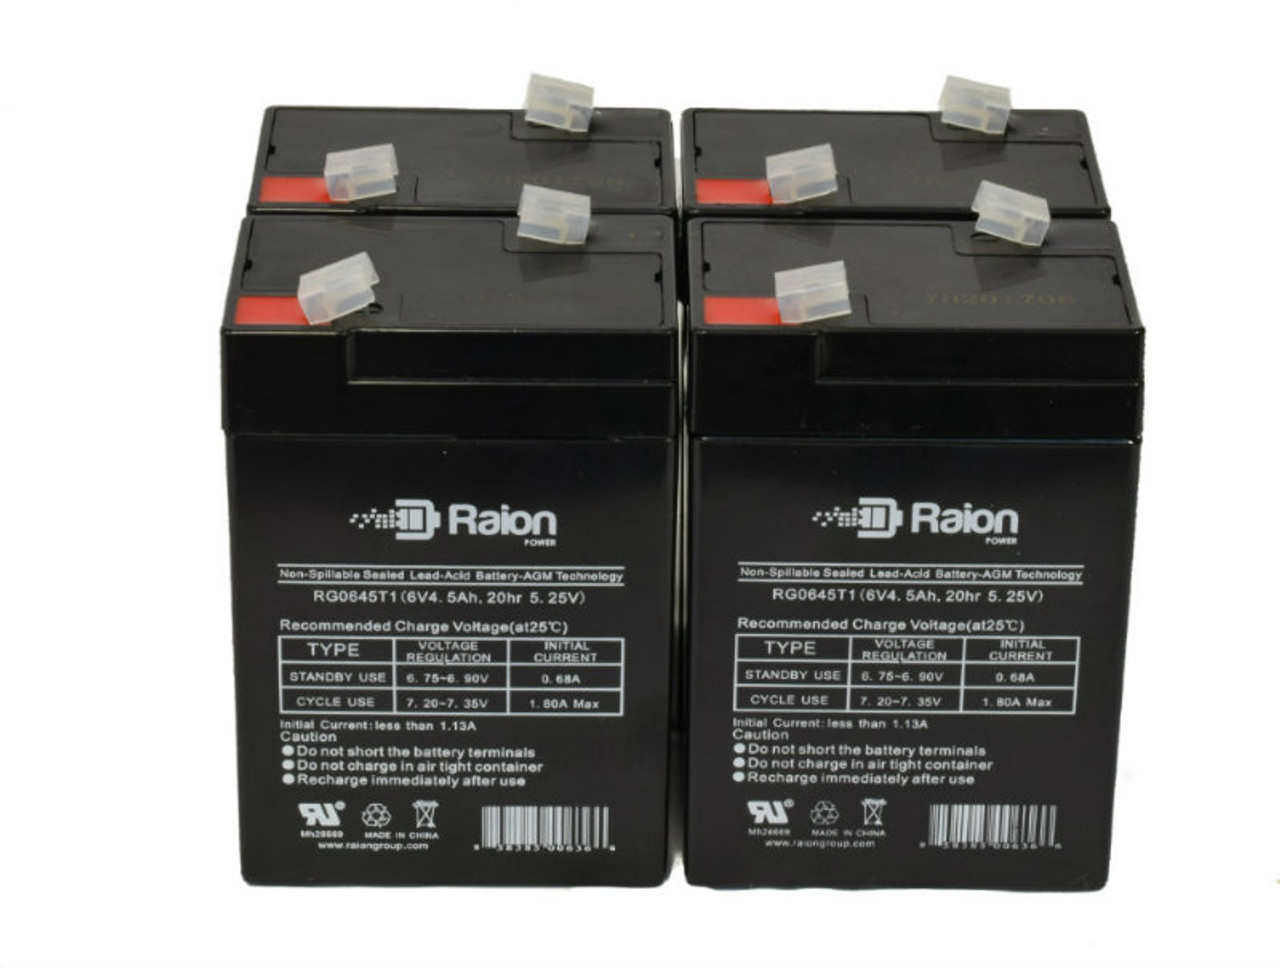 Raion Power 6 Volt 4.5Ah RG0645T1 Replacement Battery for MHB MS4-6B - 4 Pack